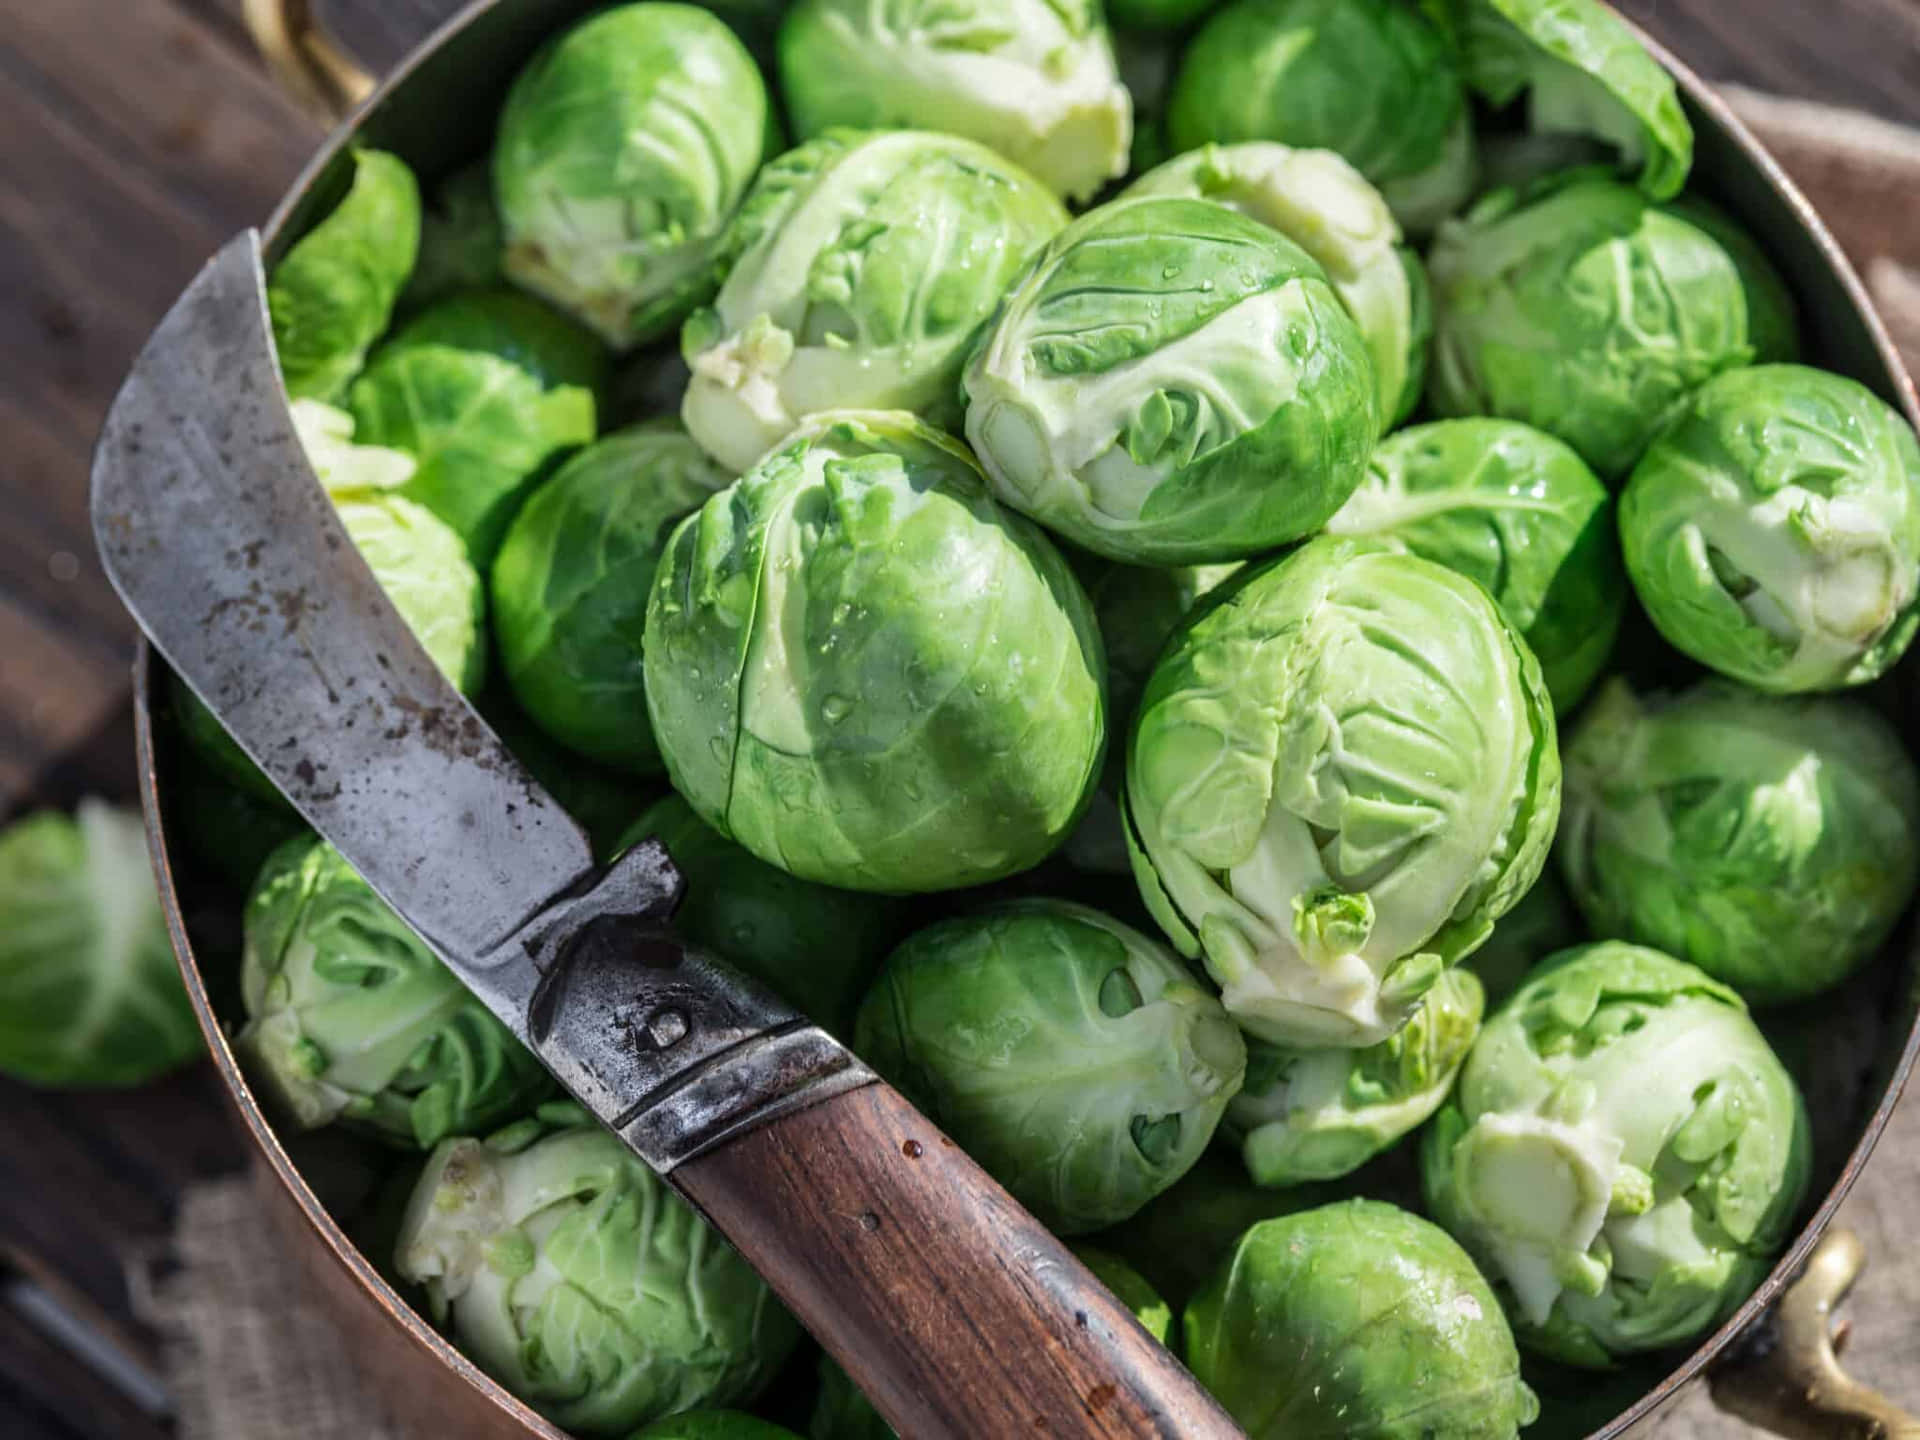 Brussel Sprouts In A Bowl With A Knife